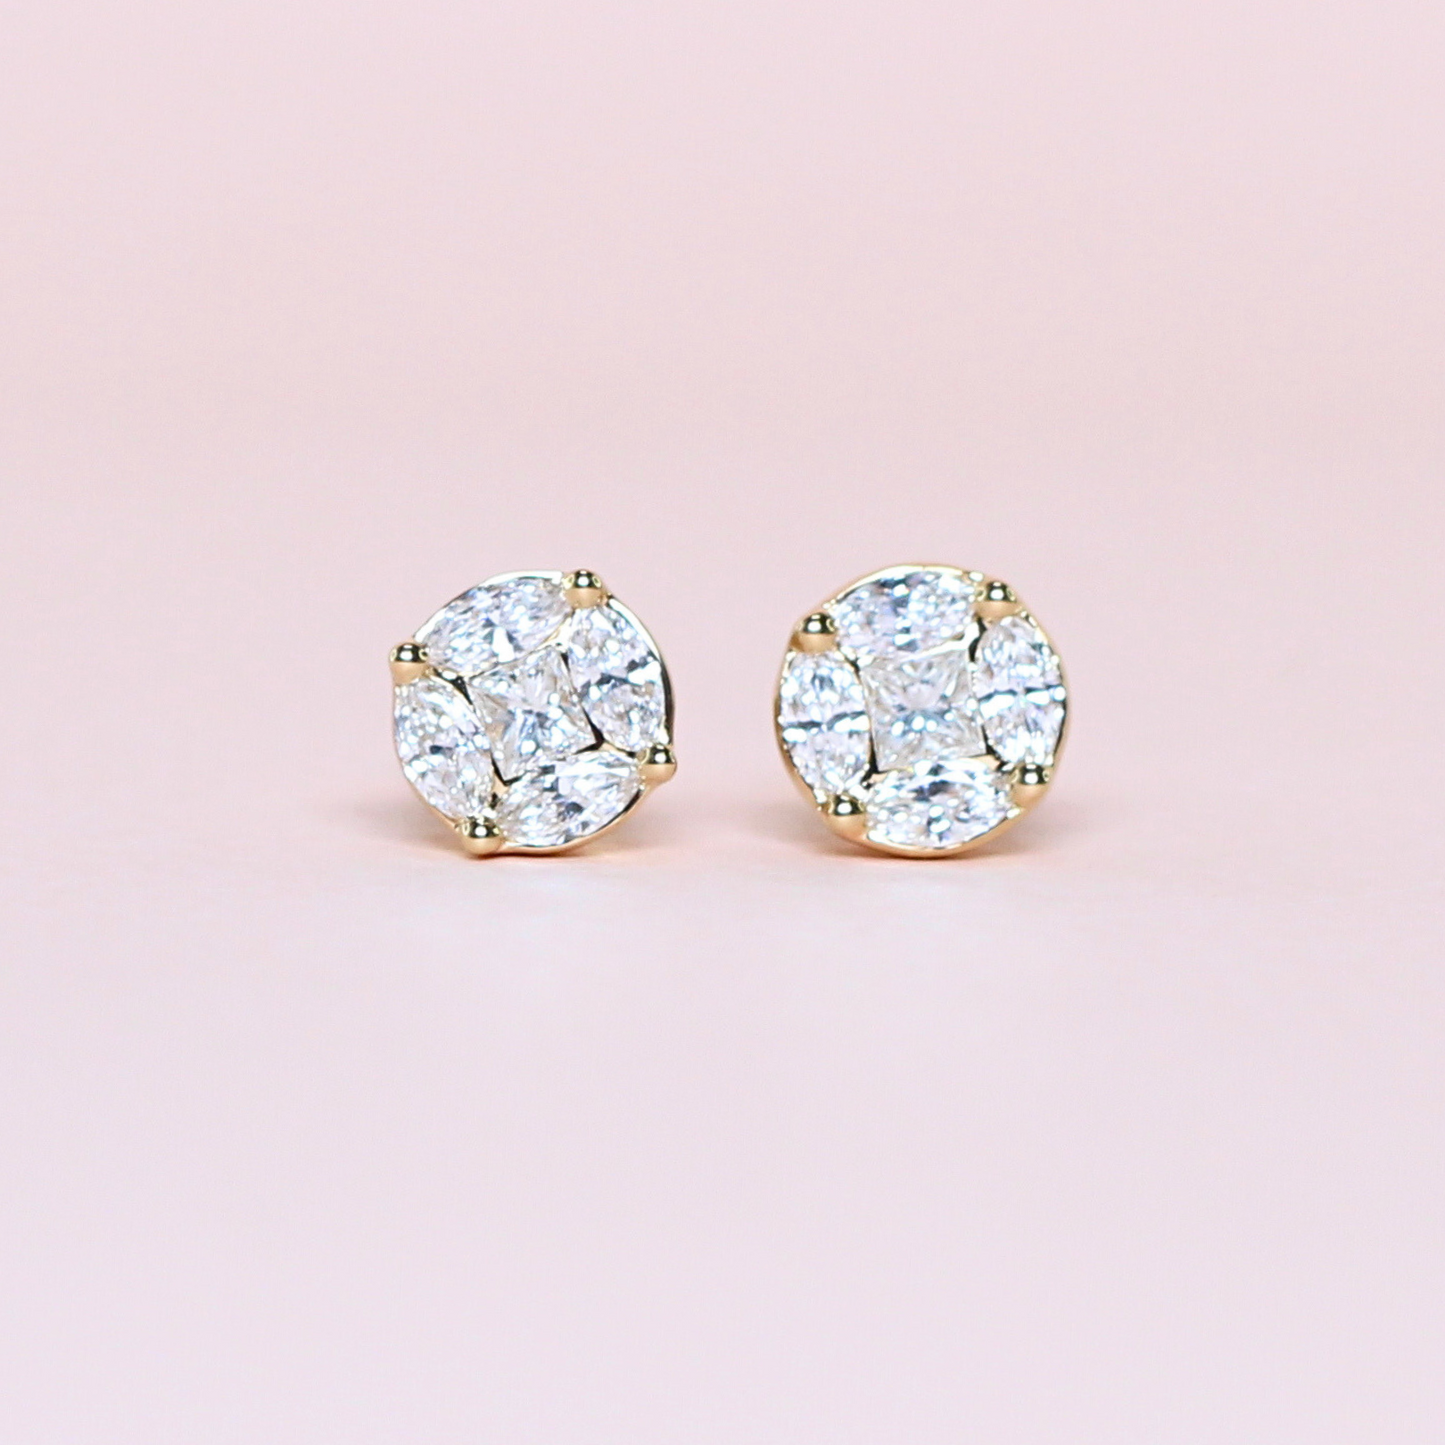 1.20cts First Generation Diamond Earrings